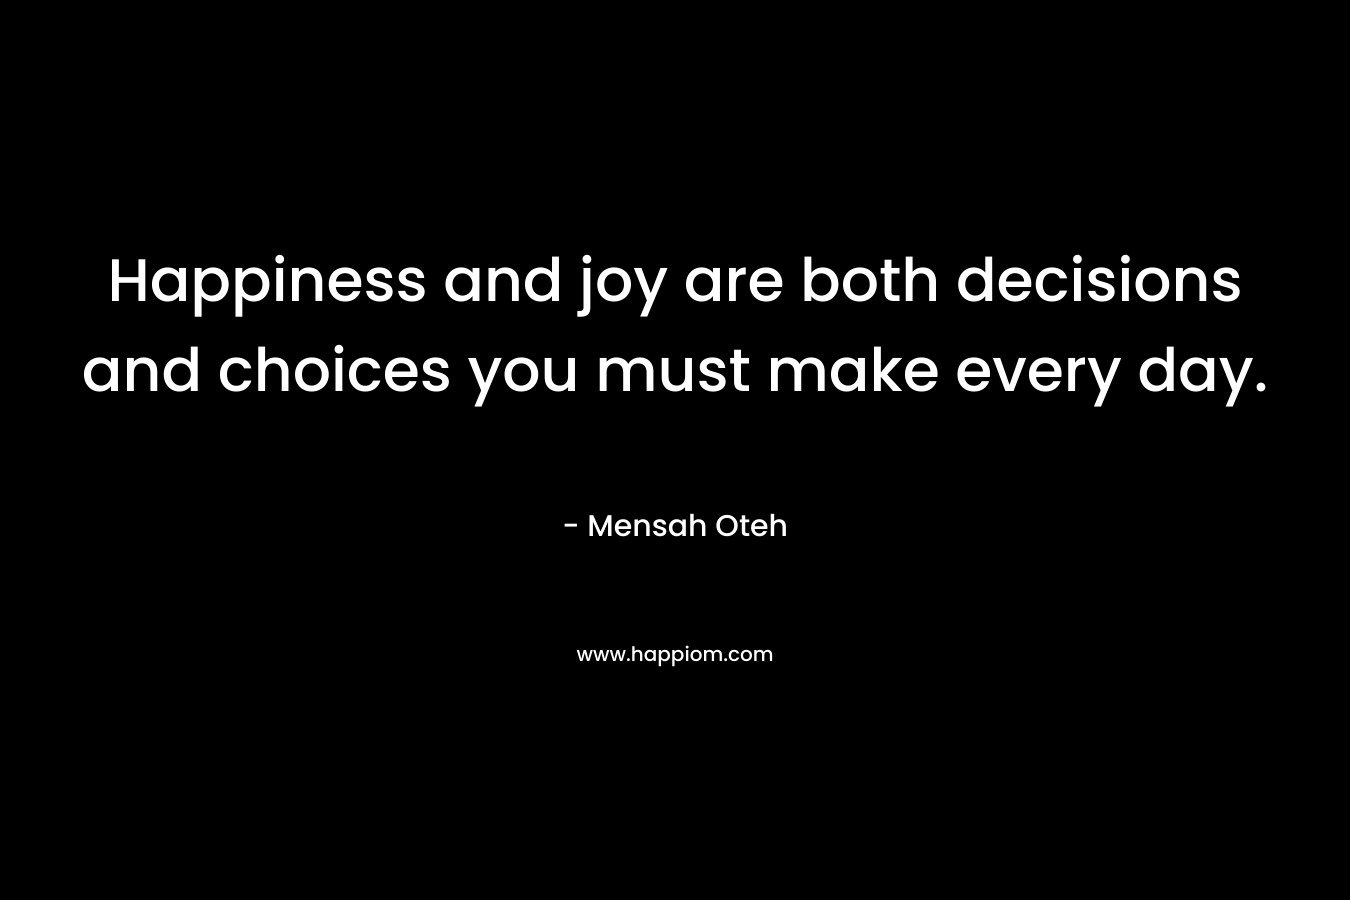 Happiness and joy are both decisions and choices you must make every day.